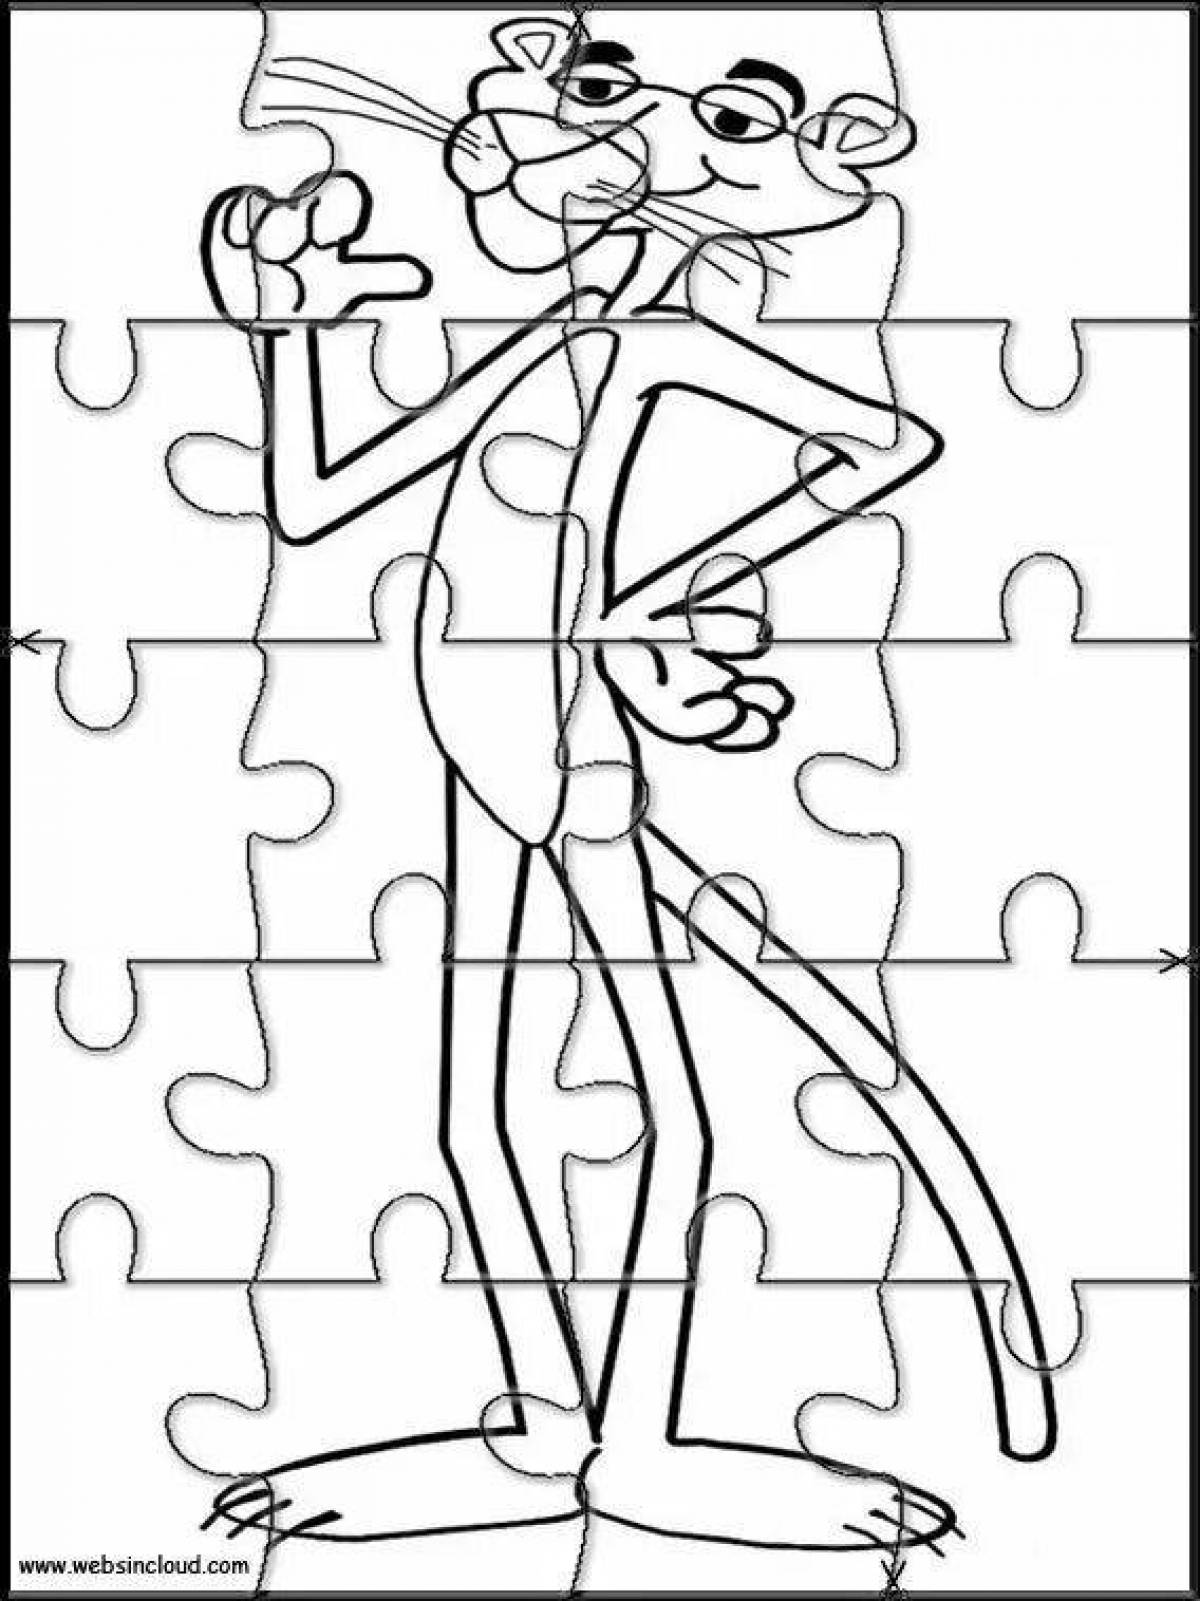 Coloring page bright pink panther